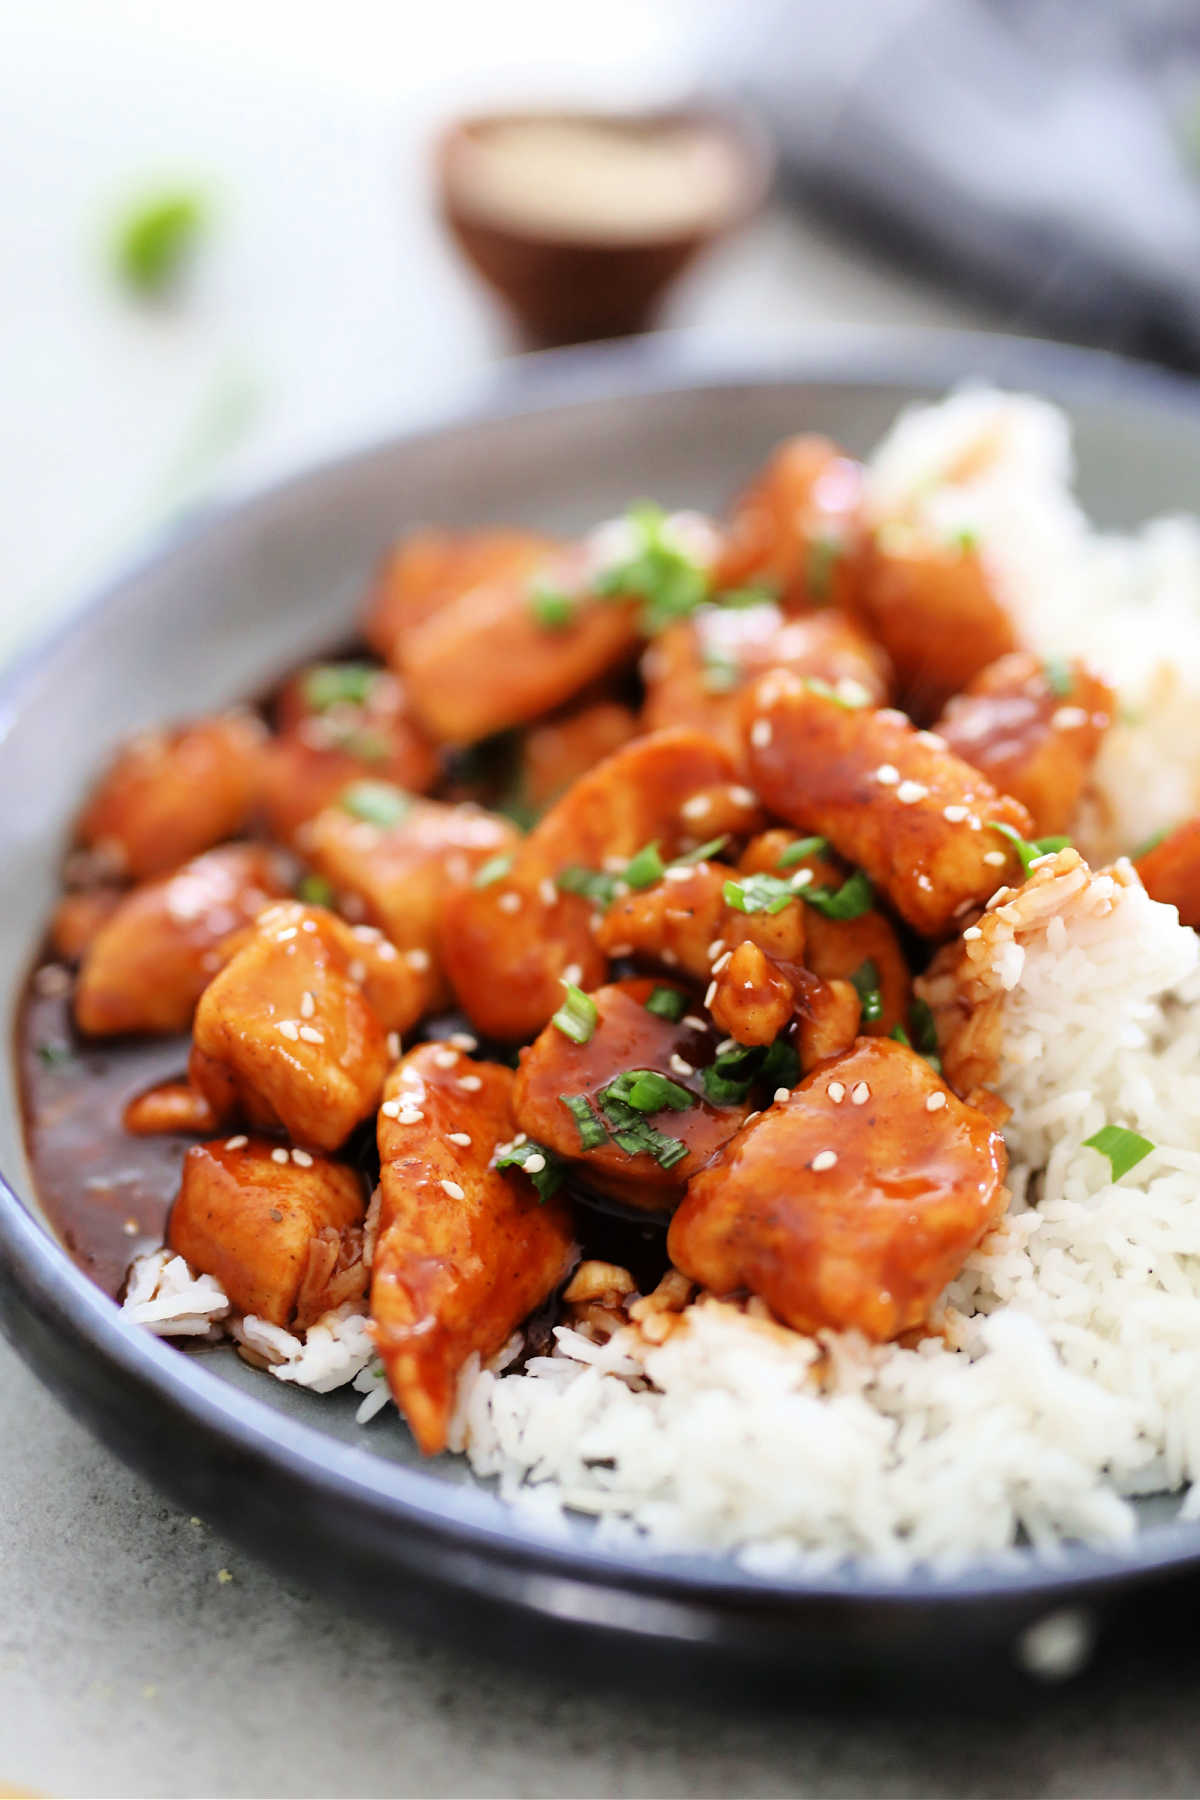 sweet and sour sauce over chicken bites topped on white rice on a plate